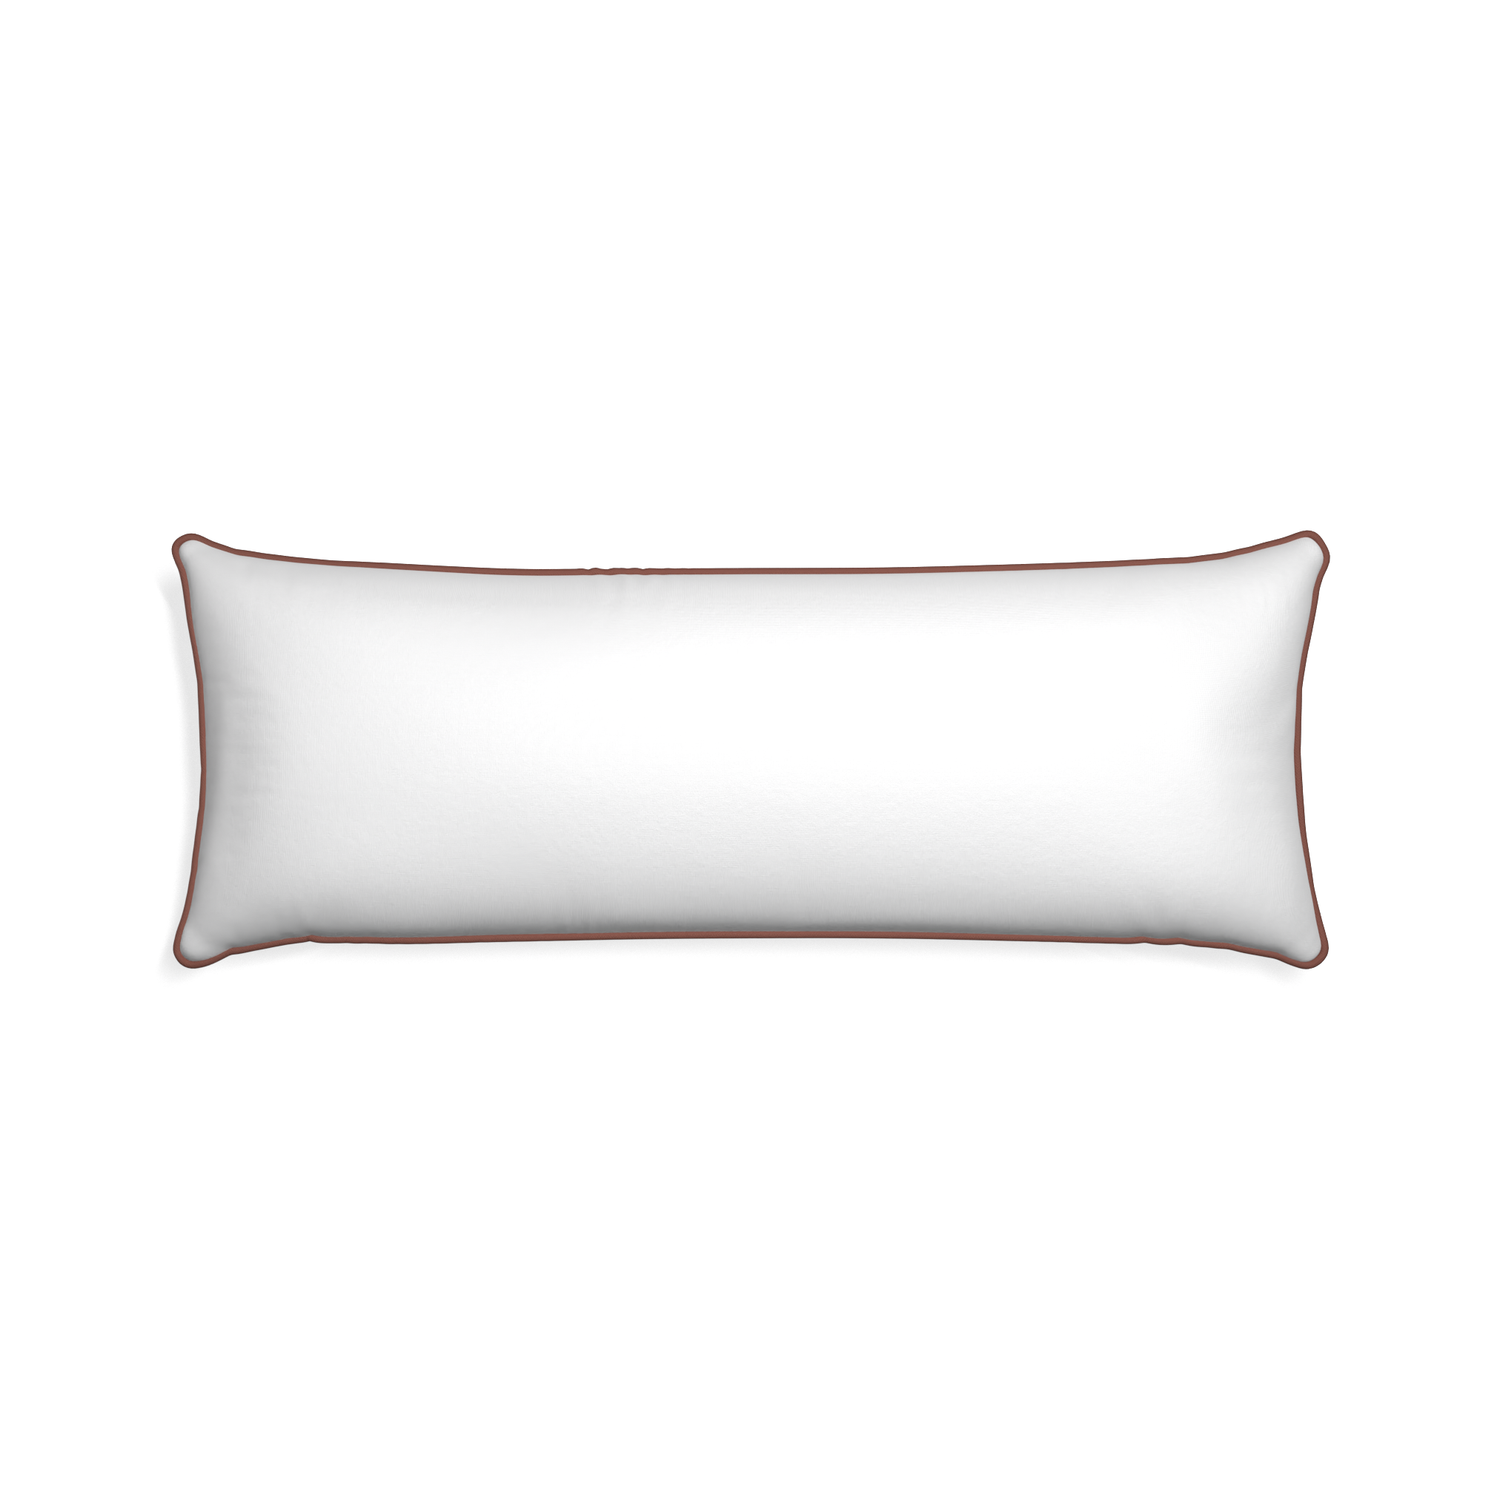 Xl-lumbar snow custom white cottonpillow with w piping on white background